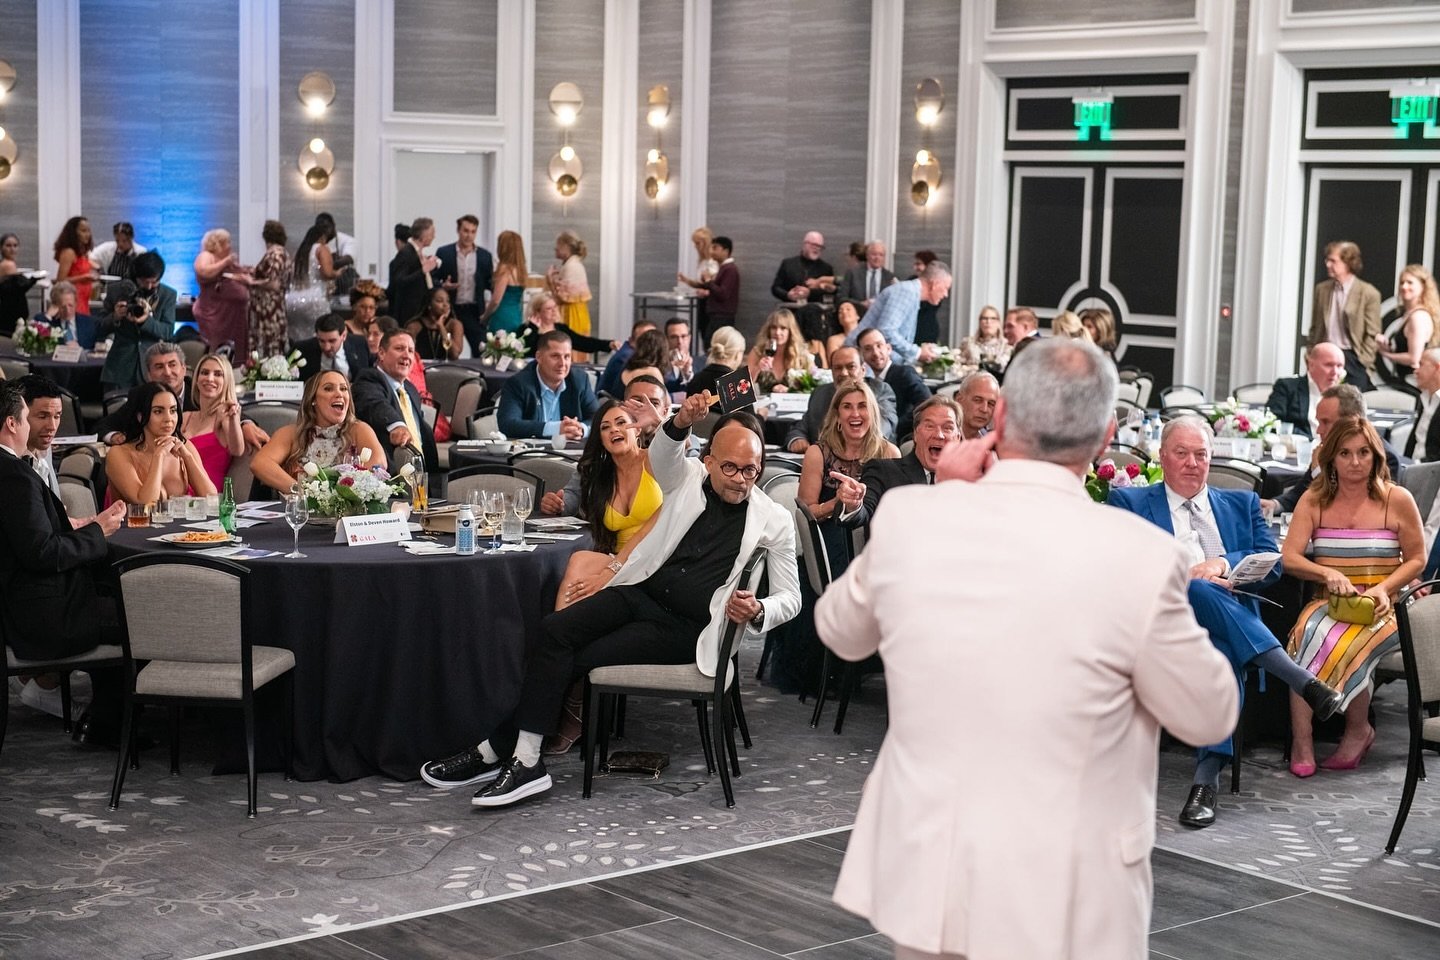 🎥 Have you attended New Orleans Film Society&rsquo;s annual fundraising gala yet? 

The NOFS Gala is the organization&rsquo;s main fundraising event, dedicated to supporting independent filmmakers. Annually, it celebrates notable figures in the film